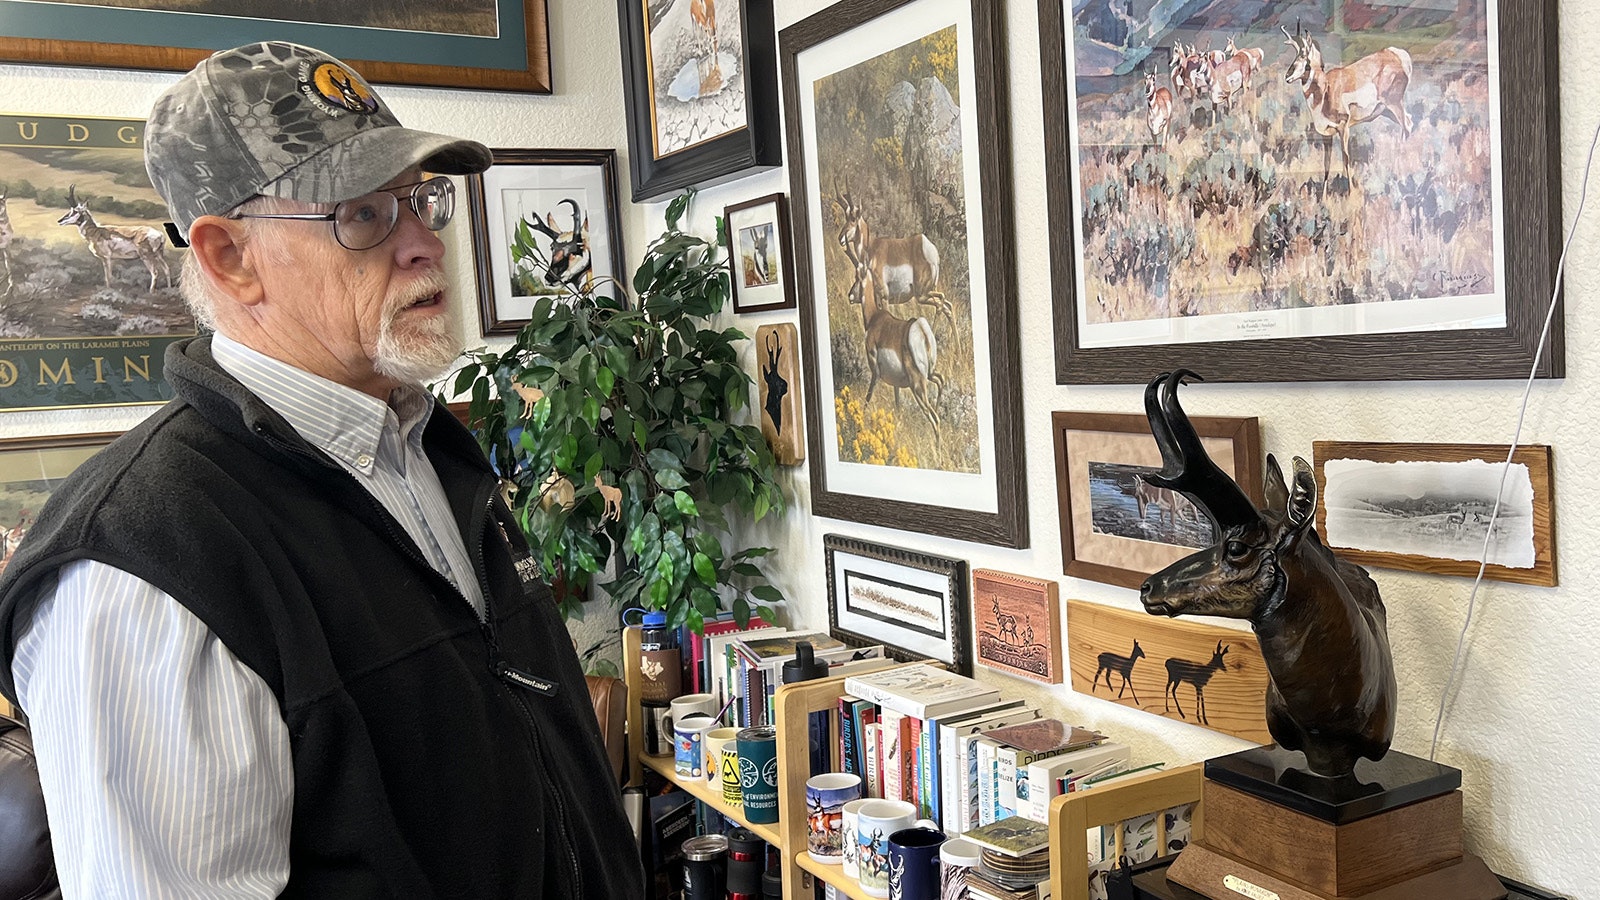 The office of wildlife biologist Rich Guenzel in Laramie has depictions of pronghorn created by artists from all over Wyoming and the West.